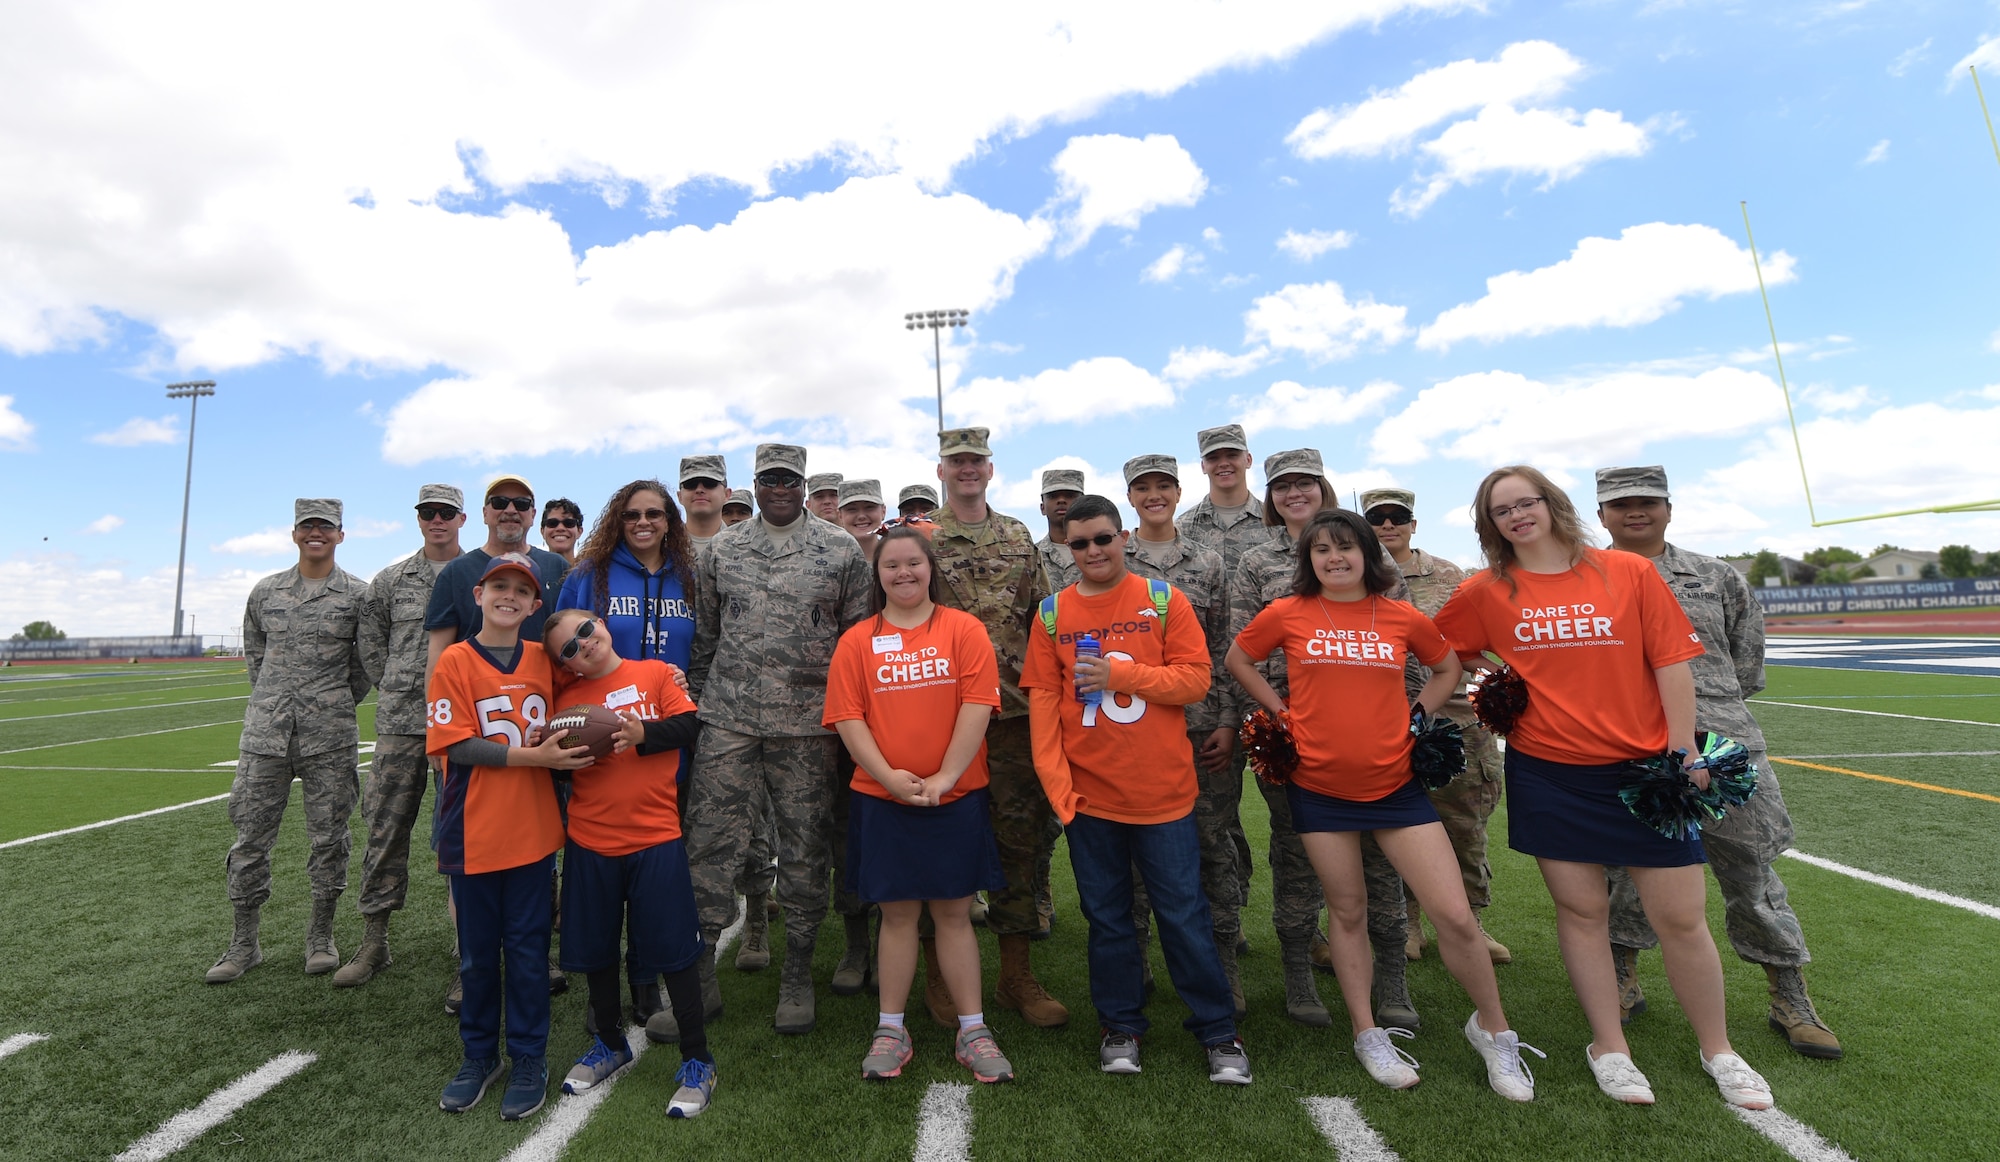 Members of Team Buckley pose for a group photo with players and cheerleaders following the 10th annual Dare to Play football event June 22, 2019, in Highlands Ranch, Colorado.